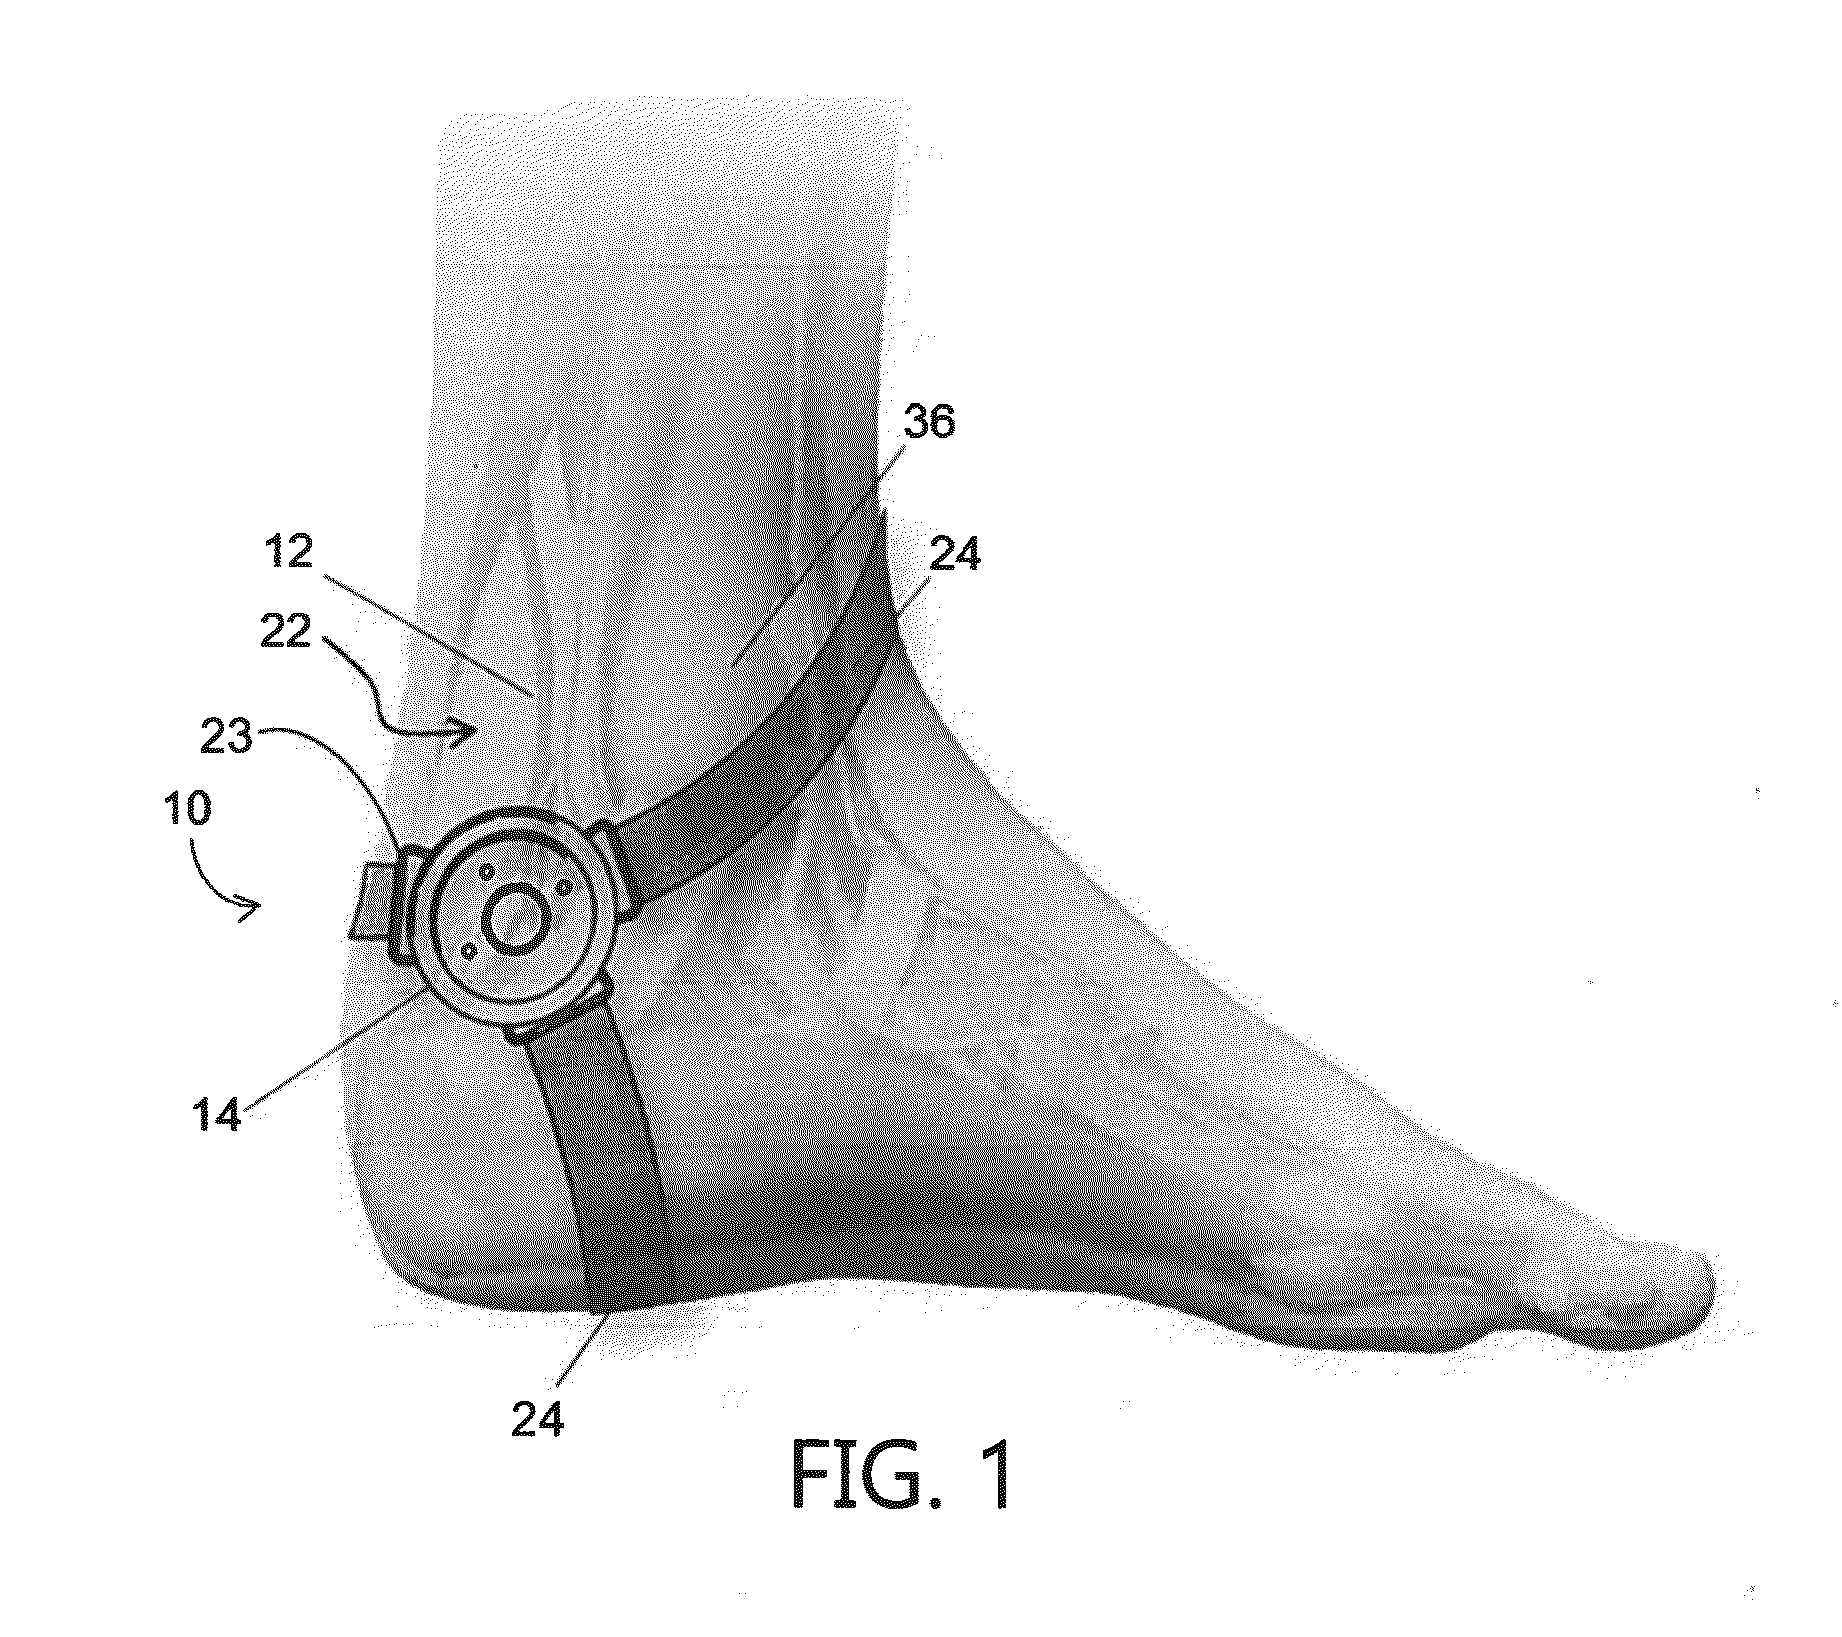 Apparatus for transcutaneous electrical stimulation of the tibial nerve